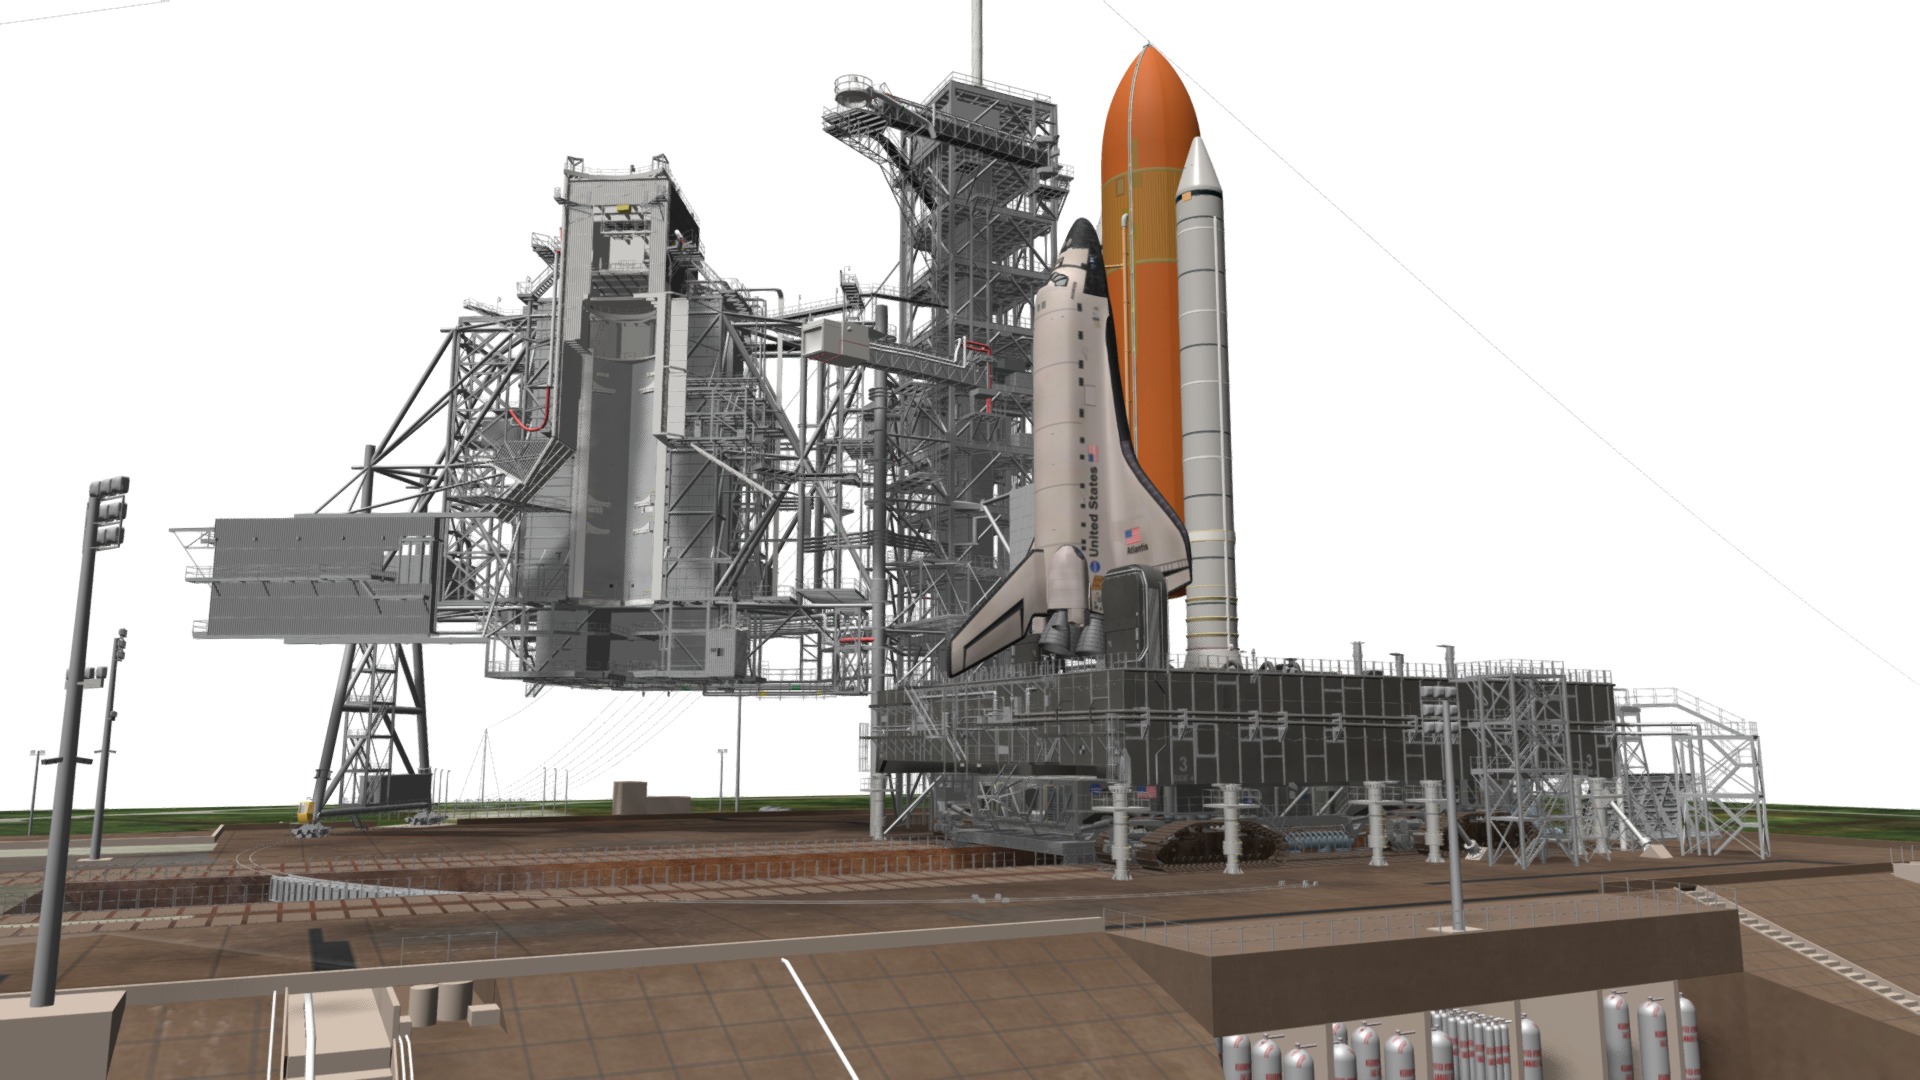 3D model Kennedy Space Center Launch Complex 39-A - This is a 3D model of the Kennedy Space Center Launch Complex 39-A. The 3D model is about a rocket on a launch pad with Kennedy Space Center Launch Complex 39 in the background.